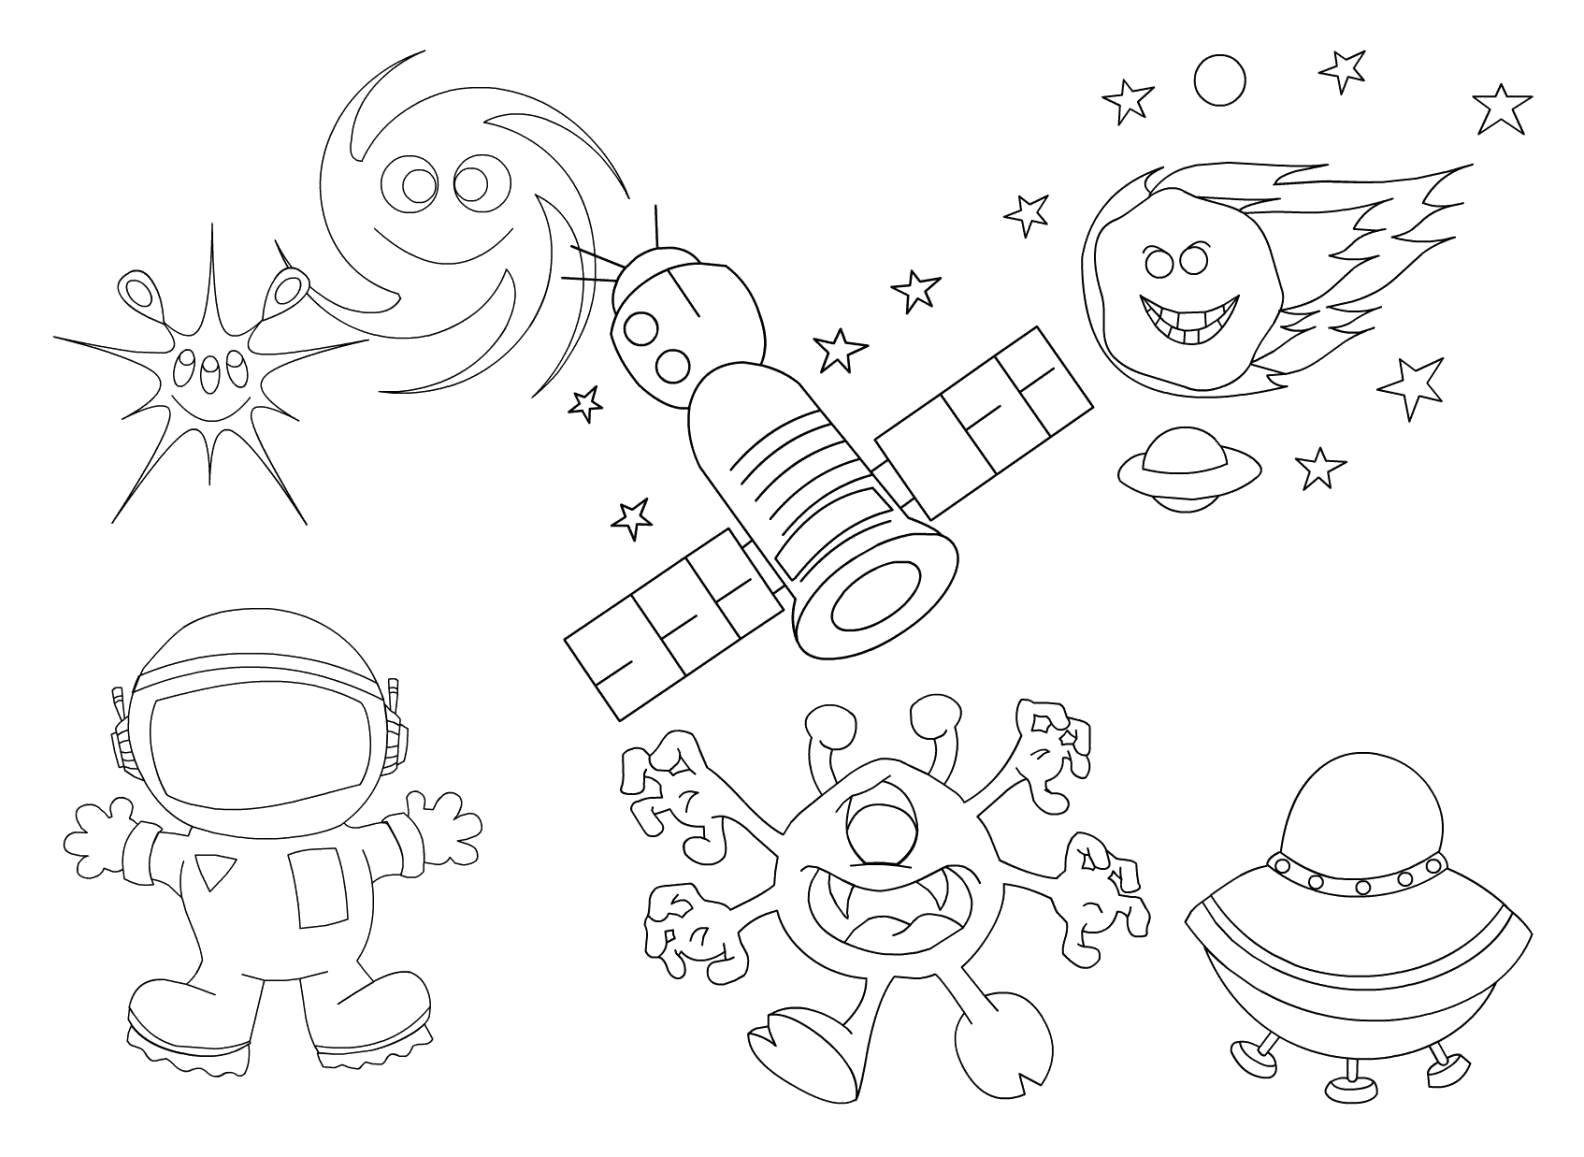 Coloring Astronaut, stars, satellite, alien, spaceship, comet in space. Category space. Tags:  Space, planet, universe, Galaxy, astronaut, alien, star.